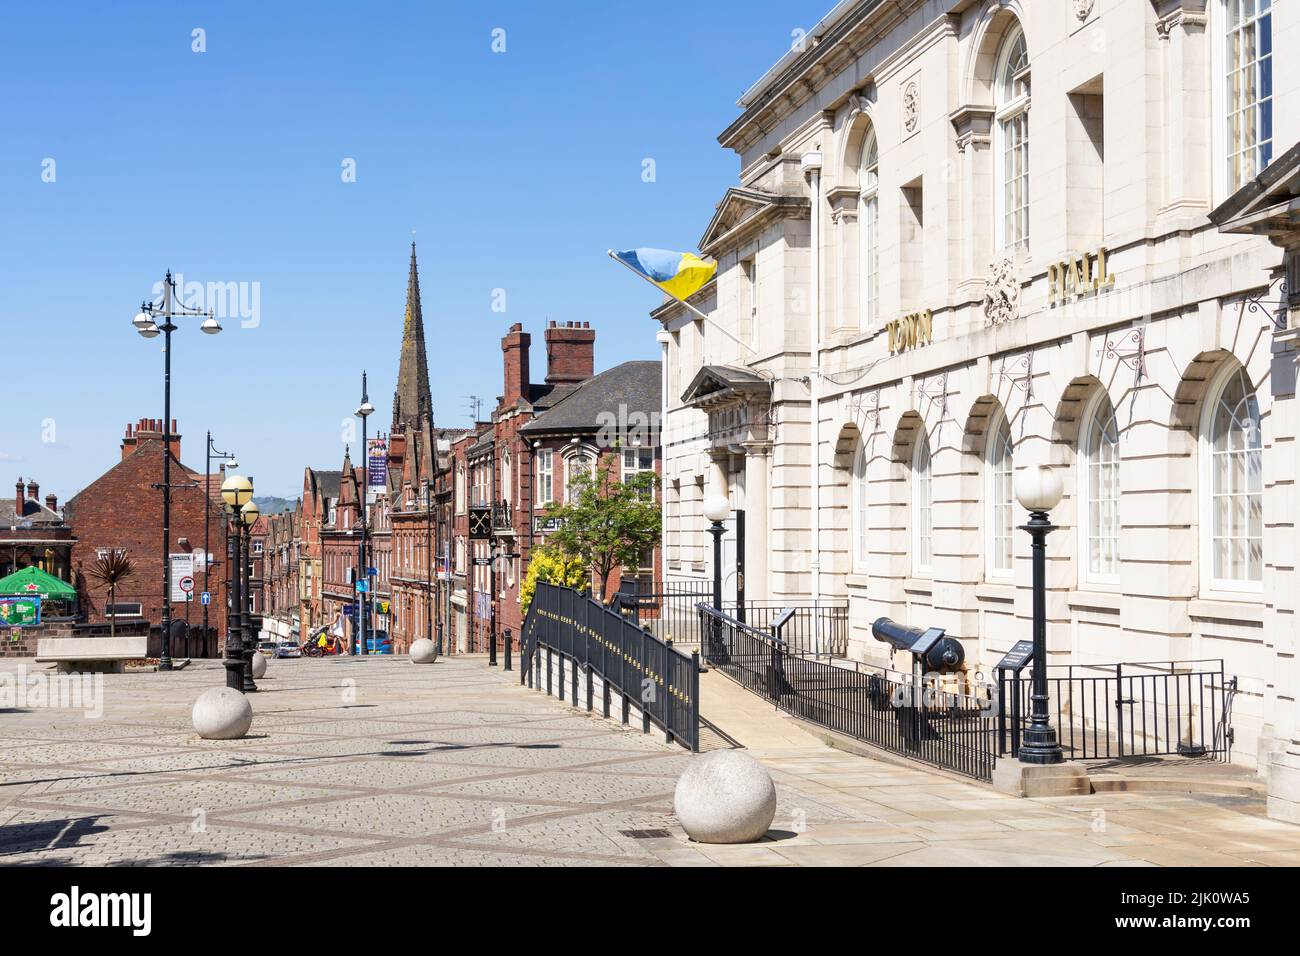 Rotherham Town Hall Rotherham Town Centre Rotherham South Yorkshire England GB Europa Stockfoto